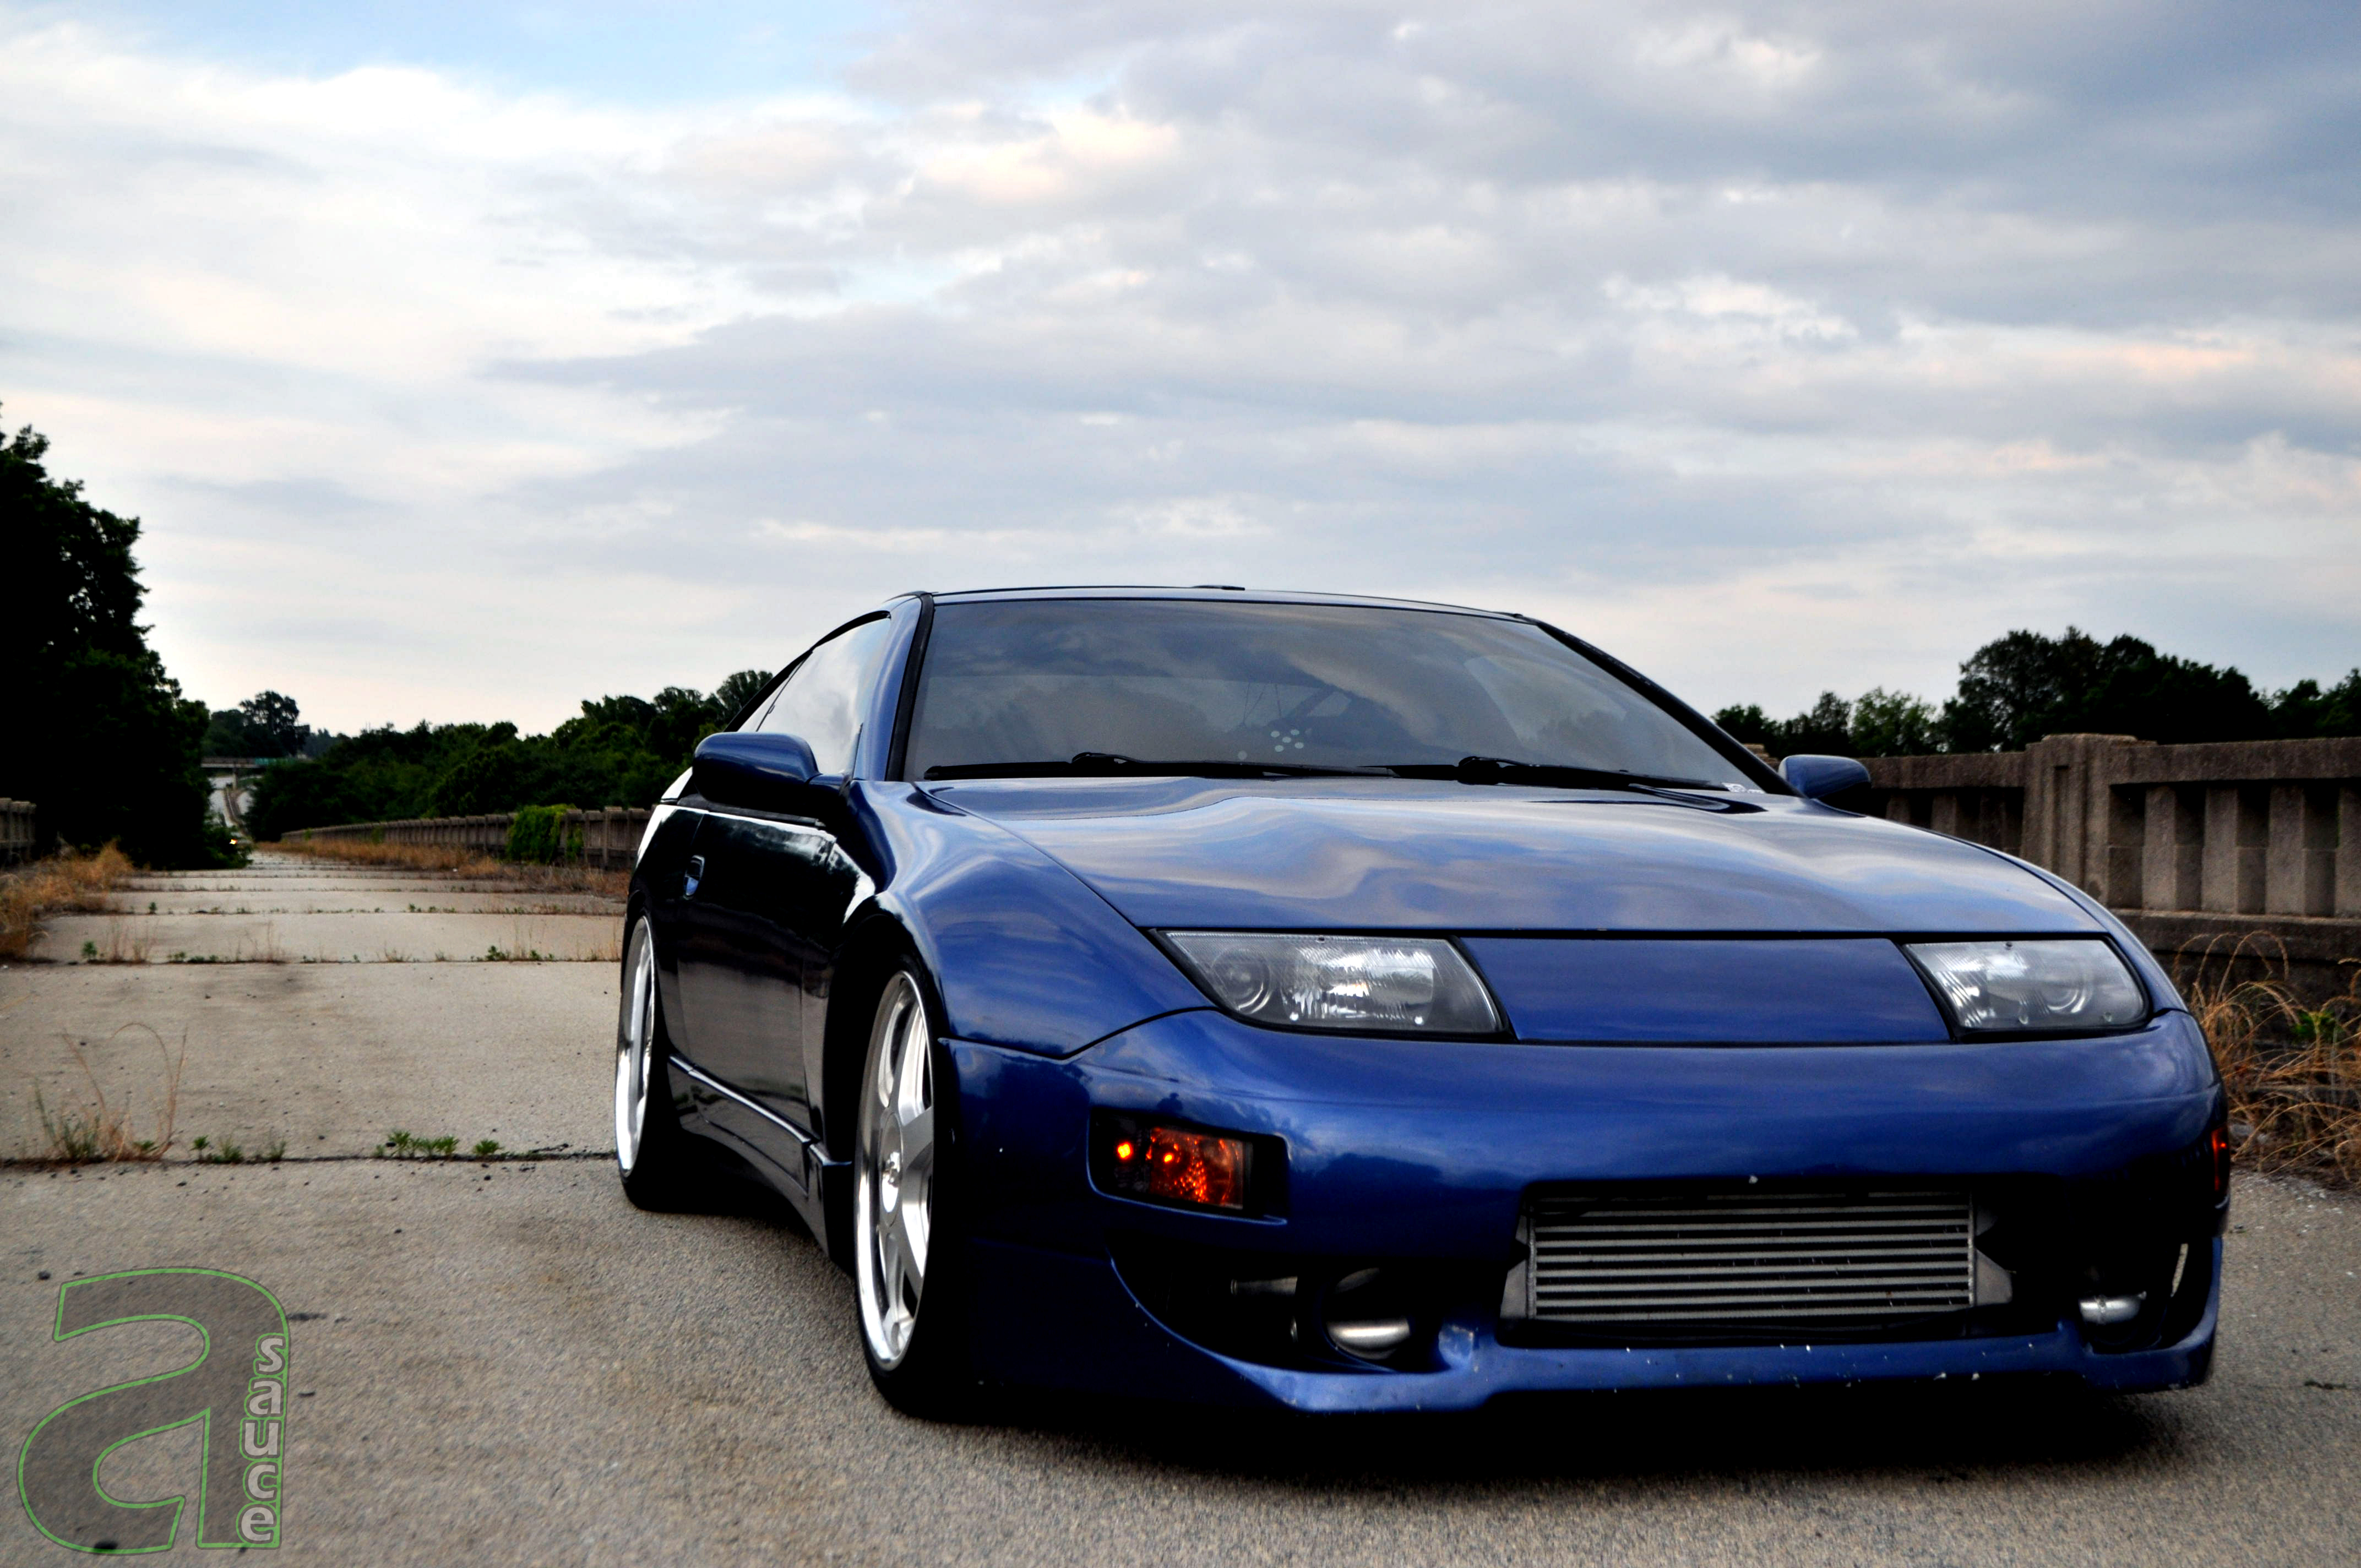 Nissan 300zx Wallpaper Image Photos Pictures Background